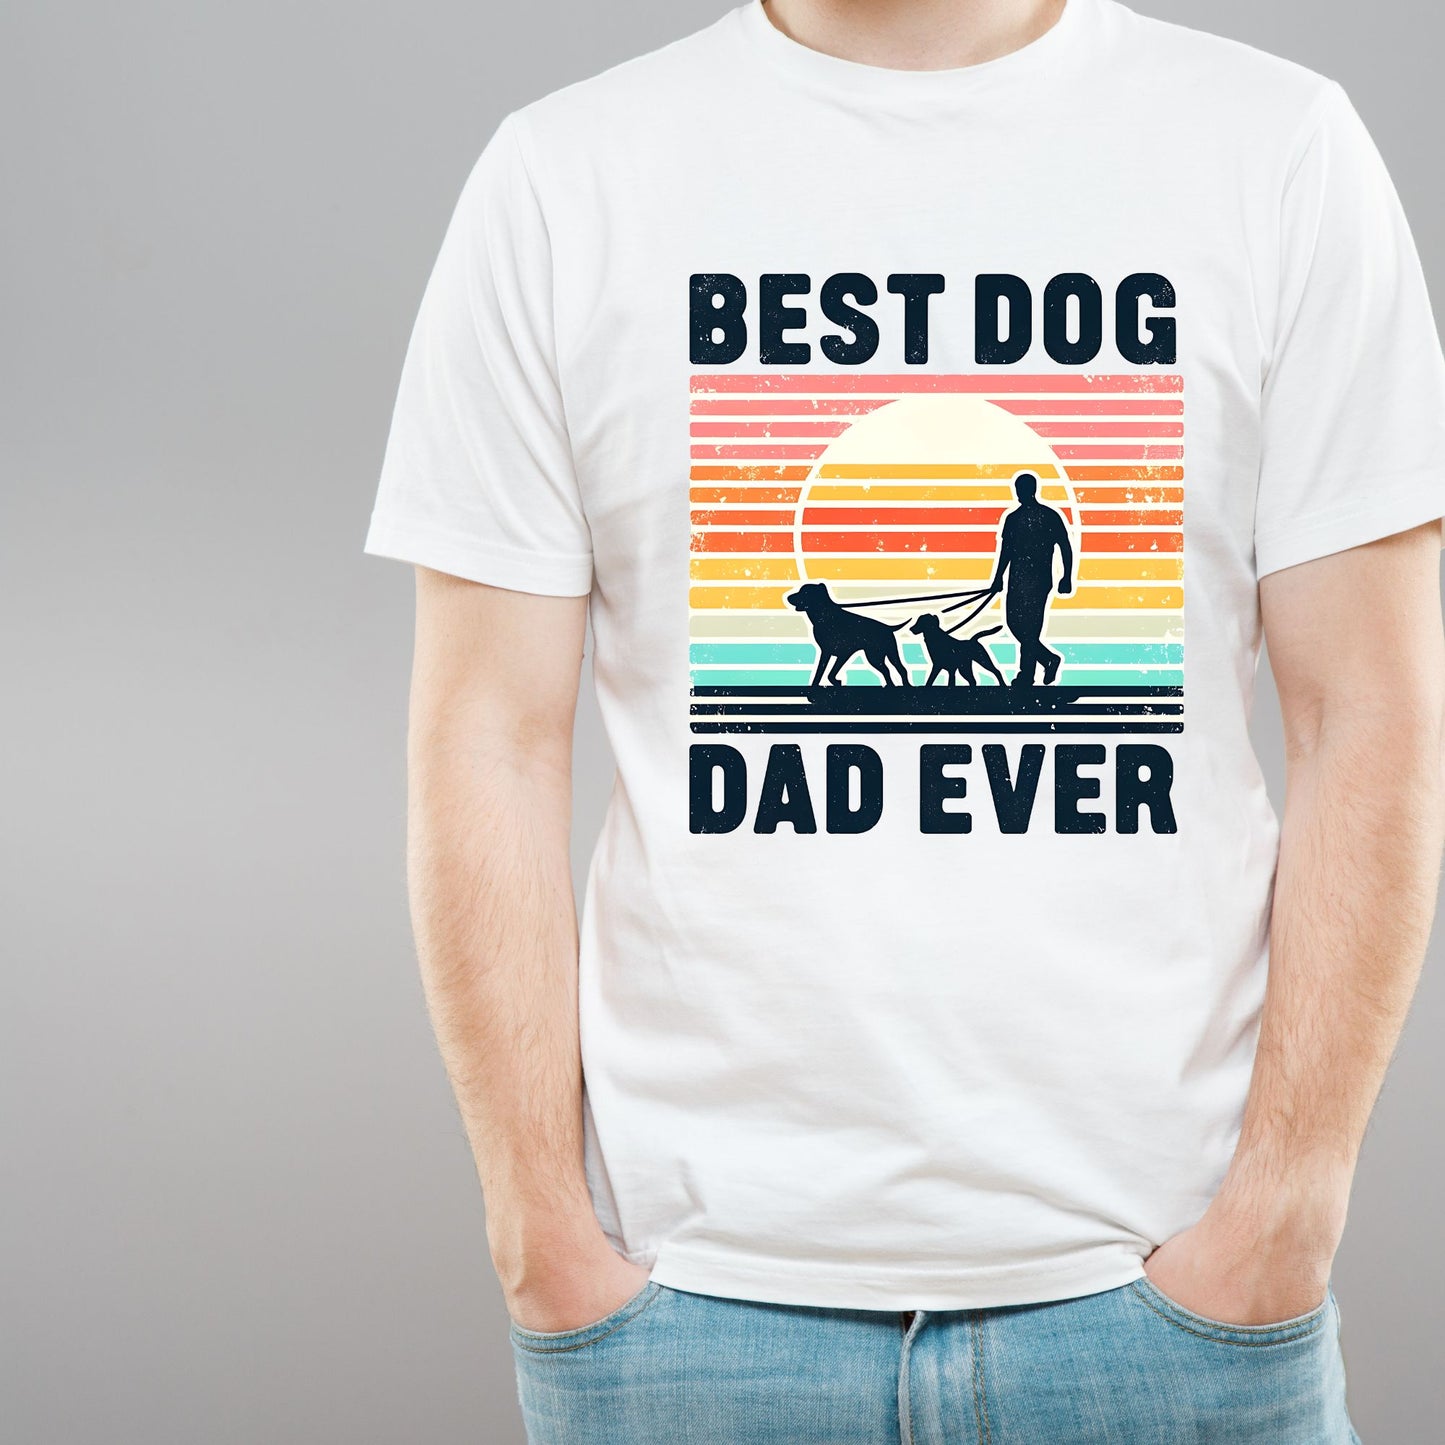 "Best Dog Dad" Tee-Shirts - Father's Day Gift